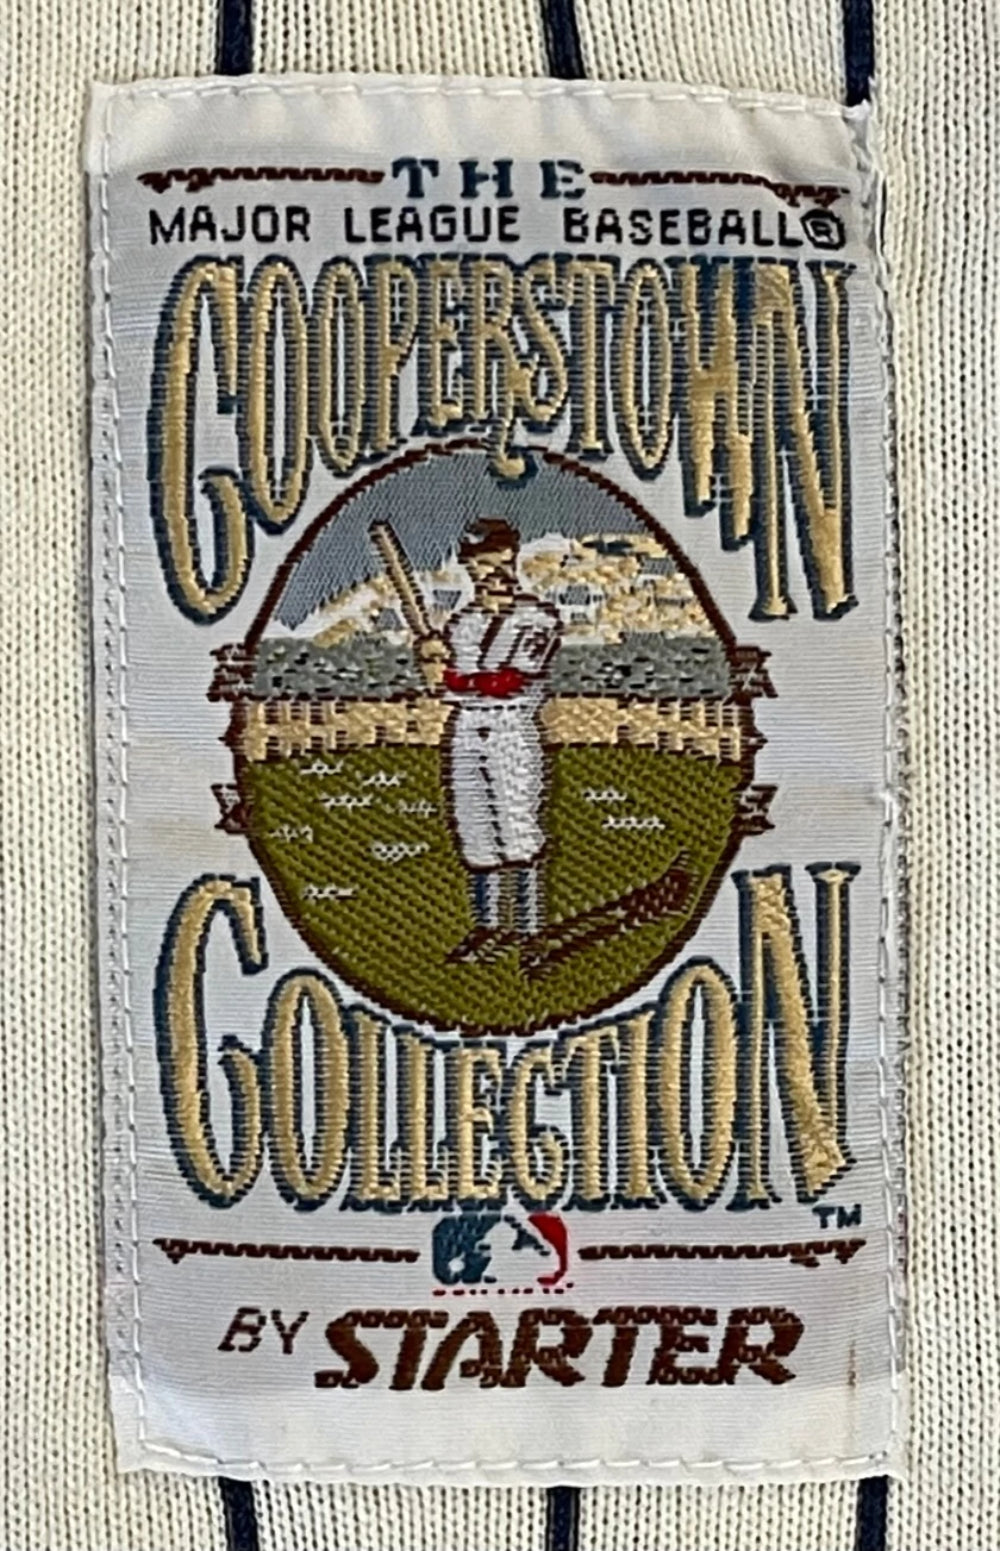 COOPERSTOWN COLLECTIONS by STARTER | labiela.com